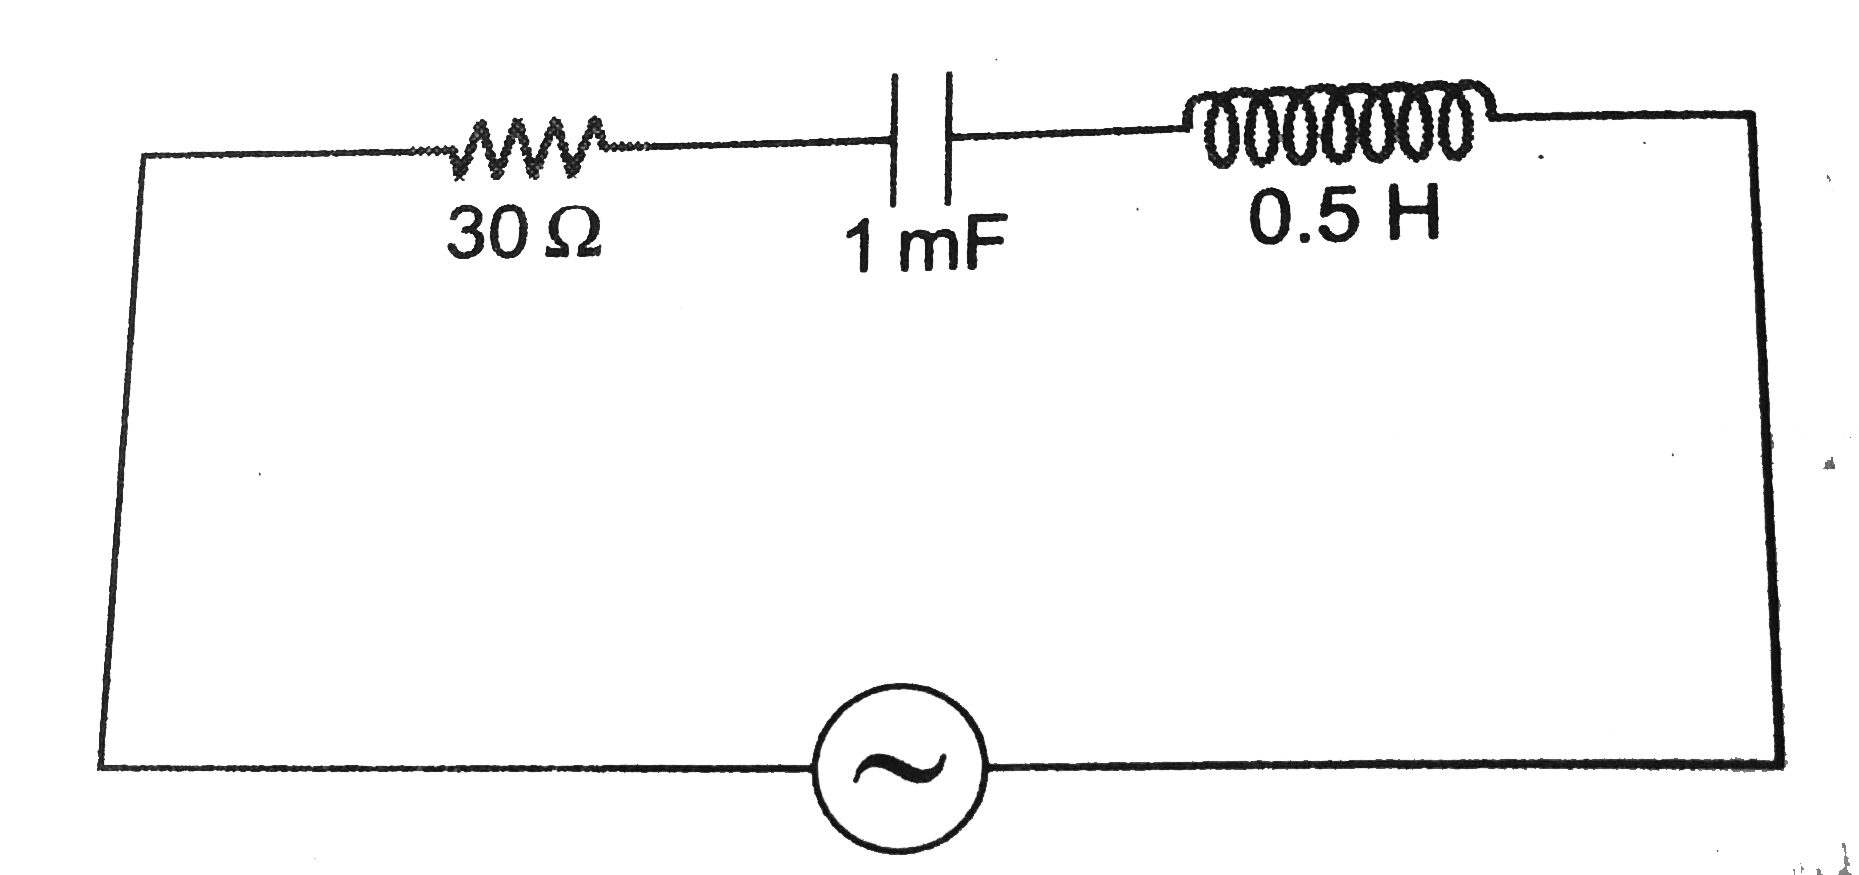 In the diagram shown in figure, V function is given. Find other four functions of time I, VC, VR and VL. Also, find power consumed in the circuit, V is given in volts and omega in rad/s.